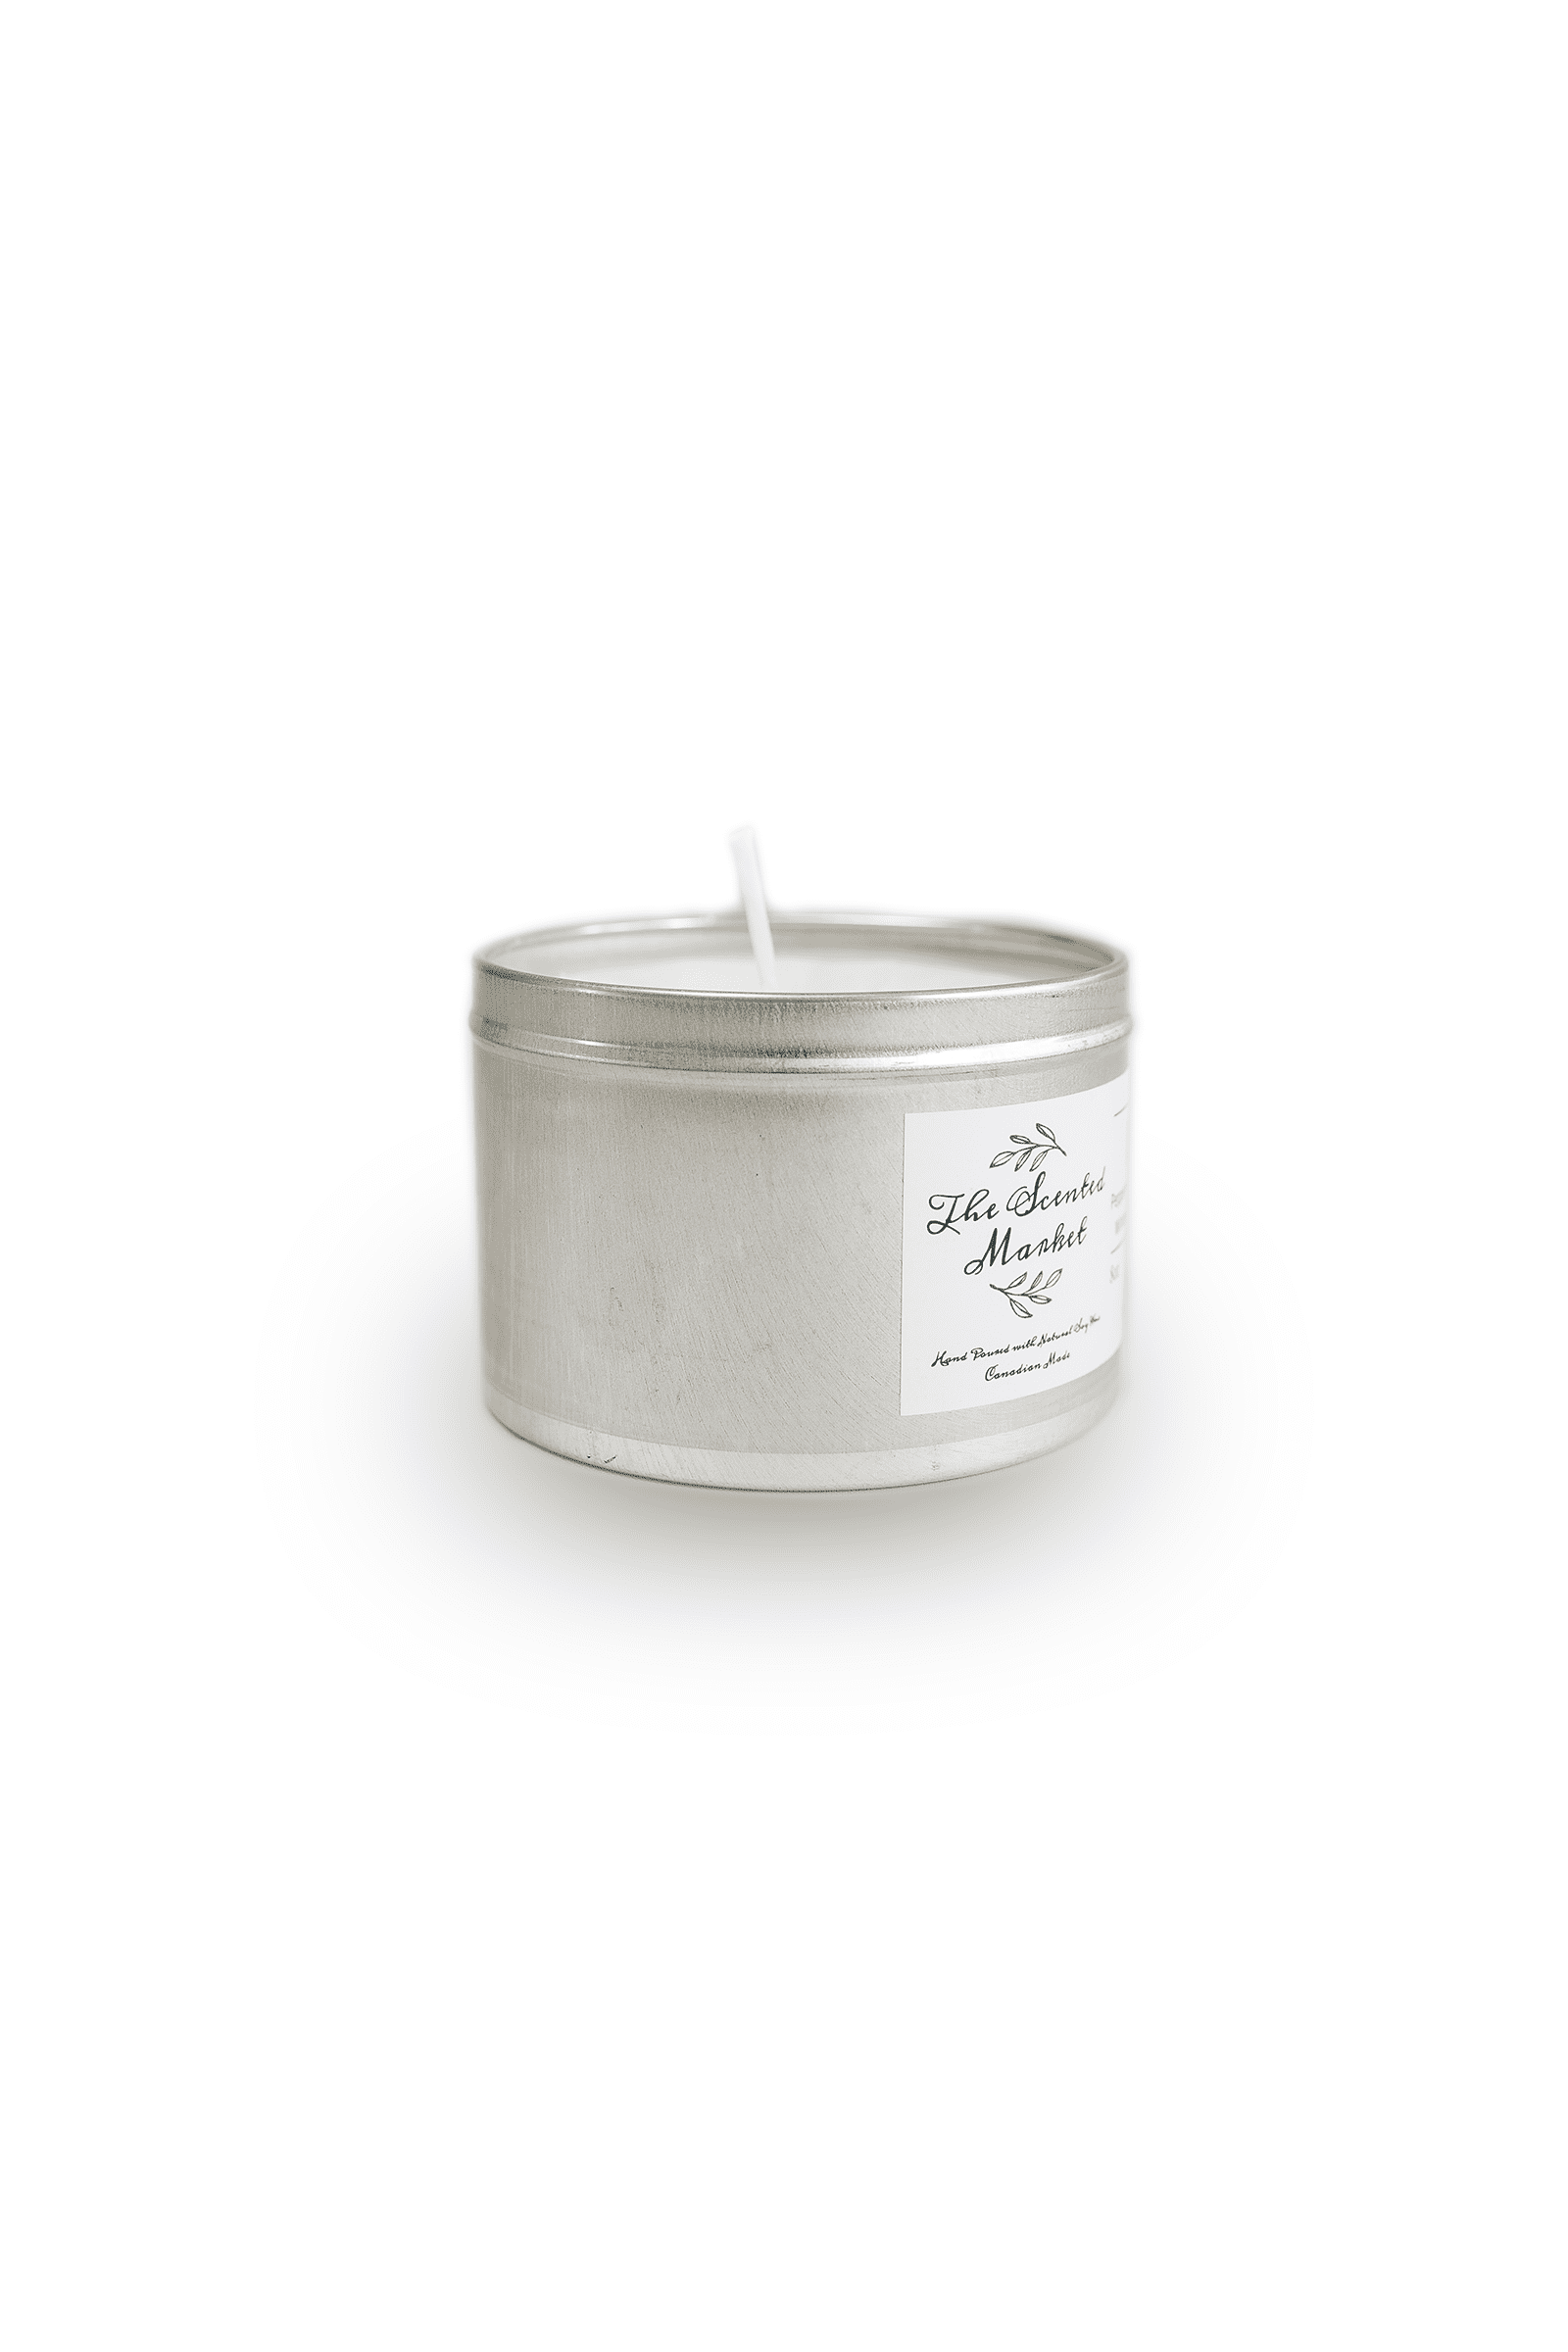 Exhale Scented Essential Oil Soy Candle